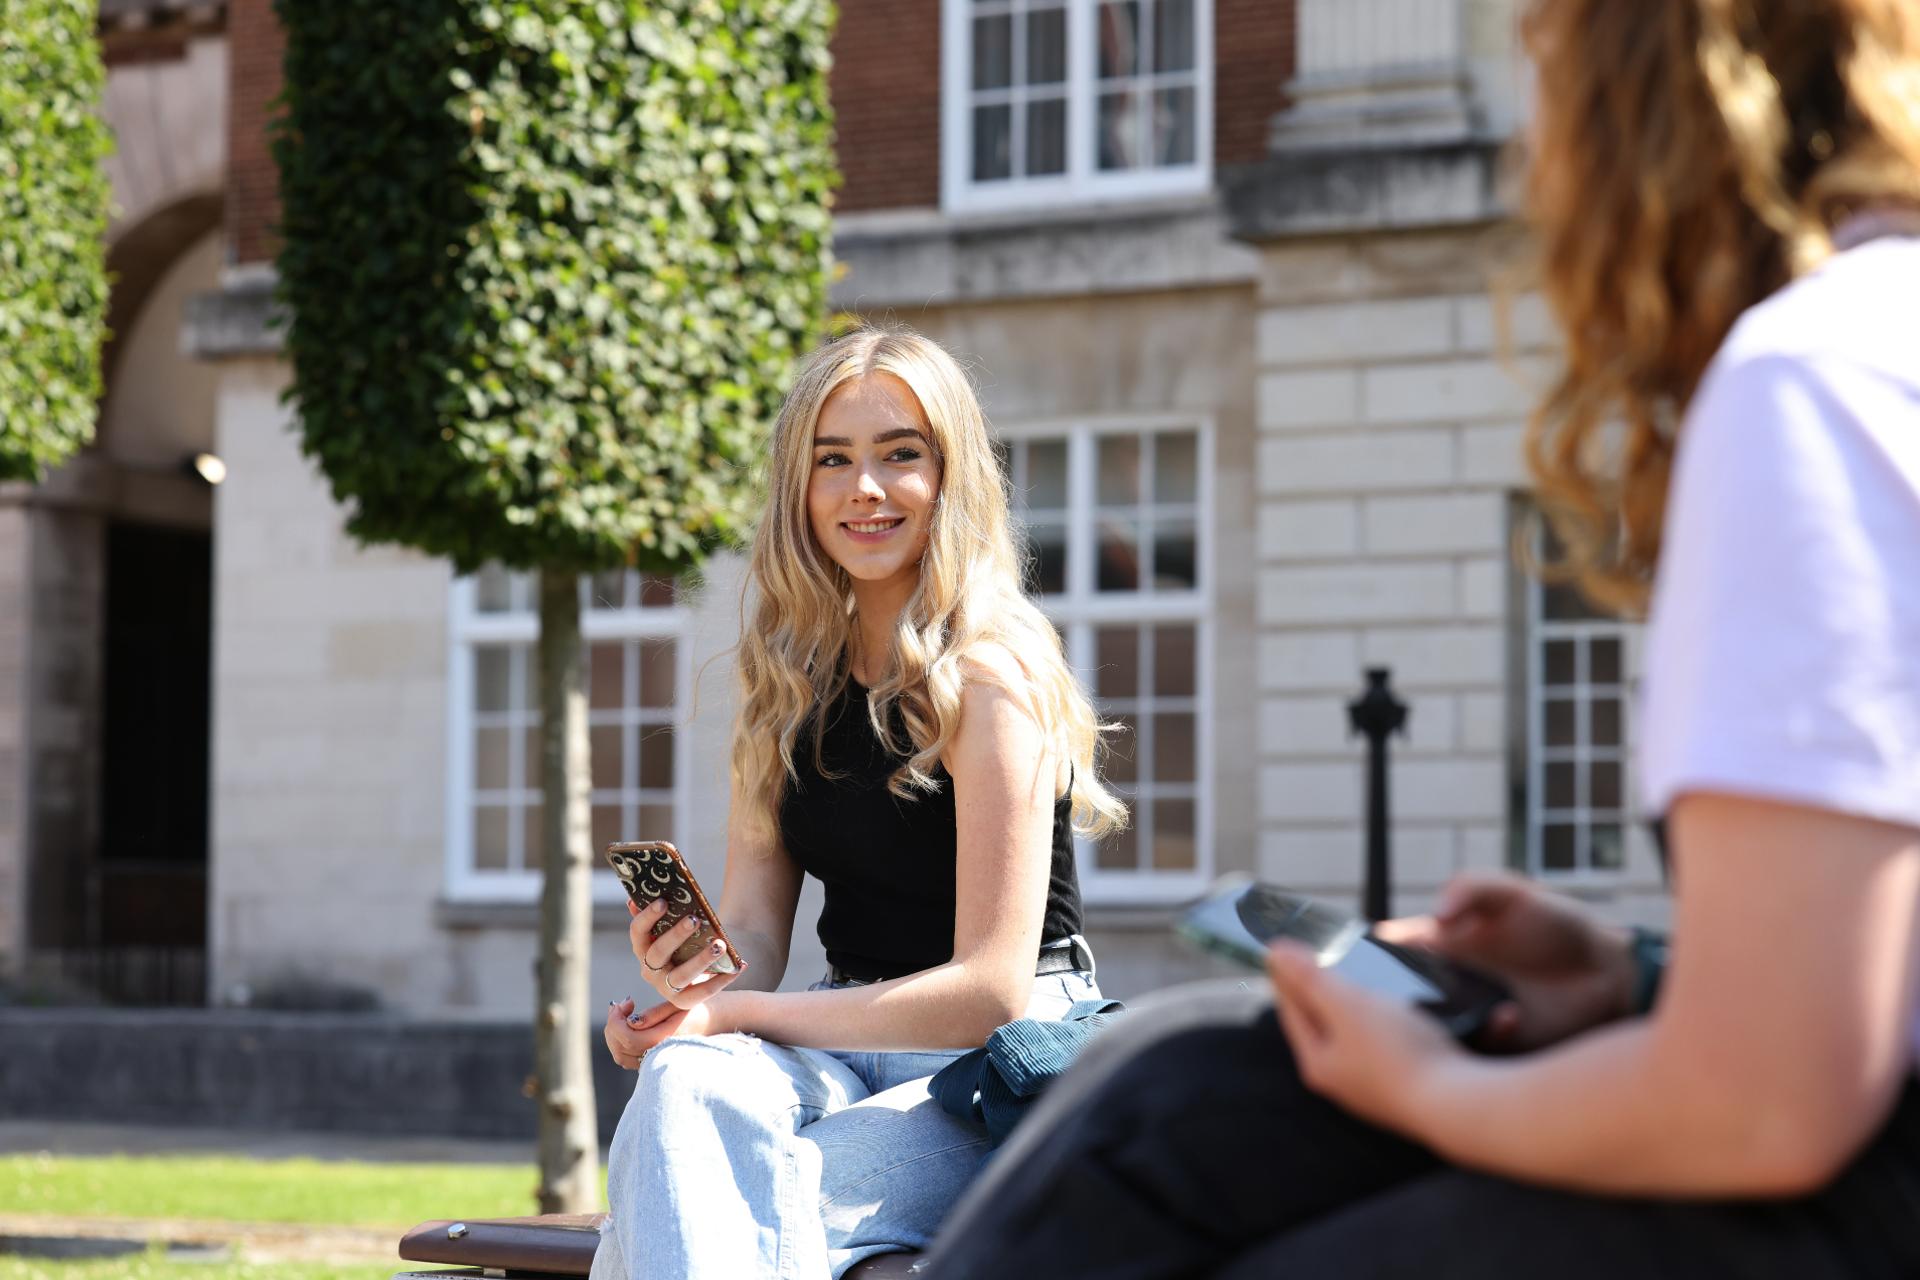 A student sat on a bench outside on campus, using a phone and smiling.